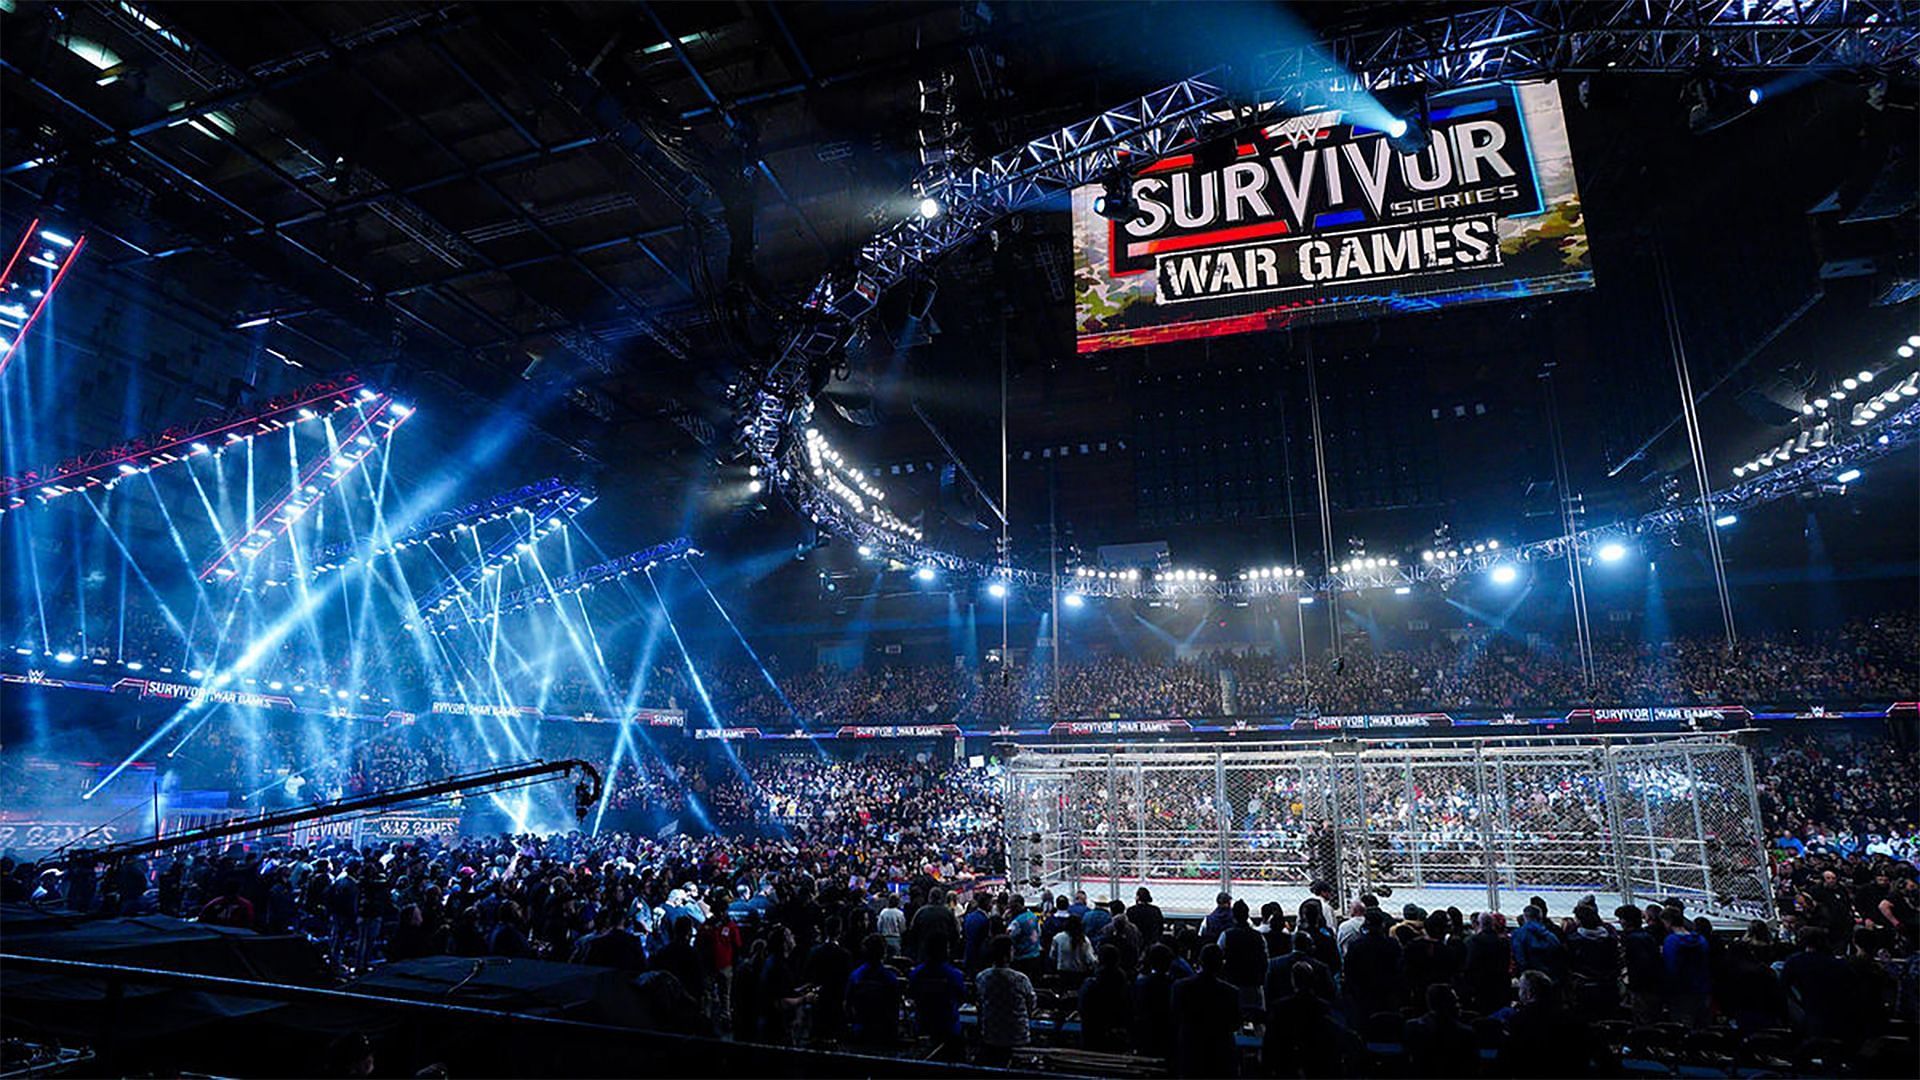 The WWE Survivor Series set and logo at the Allstate Arena